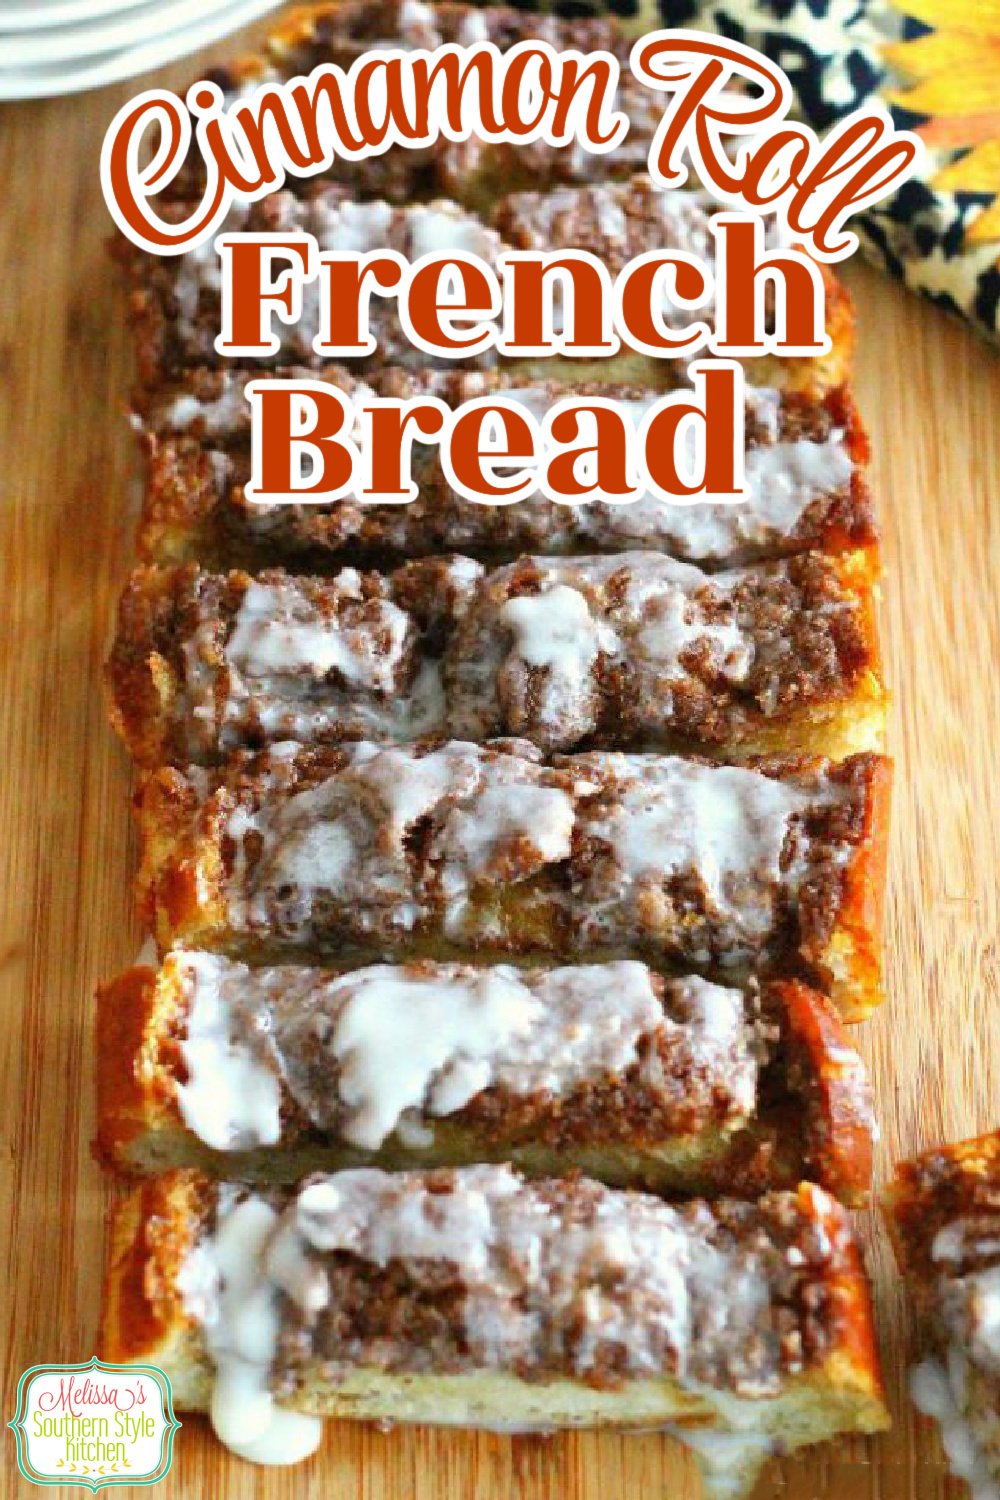 Turn one of those inexpensive loaves of bread from your local grocery store into this million dollar Cinnamon Roll French Bread #cinnamonrollbread #cinnamonrolls #bread #frenchbread #rolls #brunch #breakfast #breadrecipes #southernfood #southernrecipes #easyrecipes #cinnamon via @melissasssk